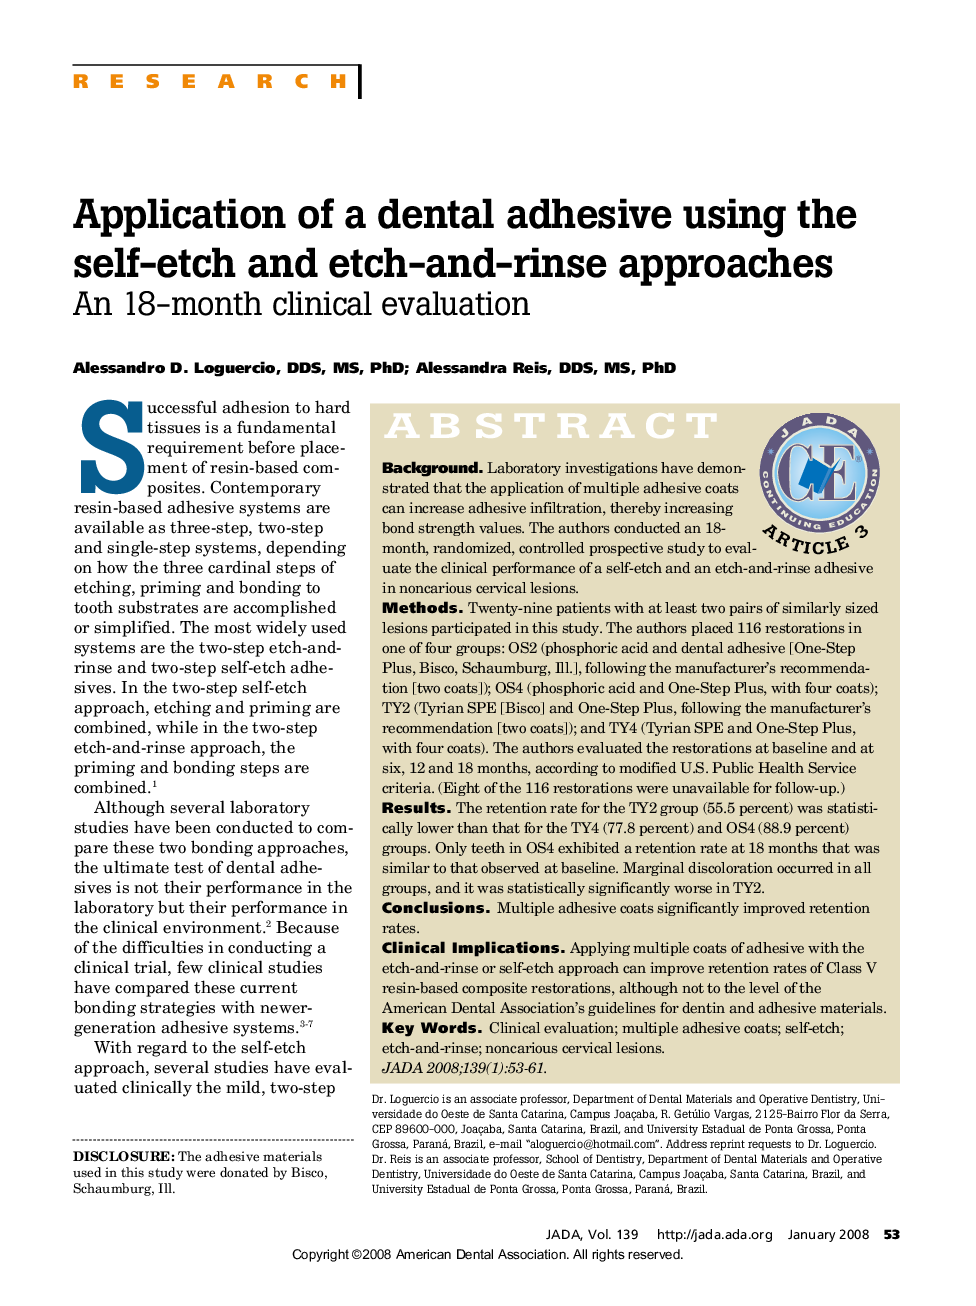 Application of a Dental Adhesive Using the Self-Etch and Etch-and-Rinse Approaches : An 18-Month Clinical Evaluation